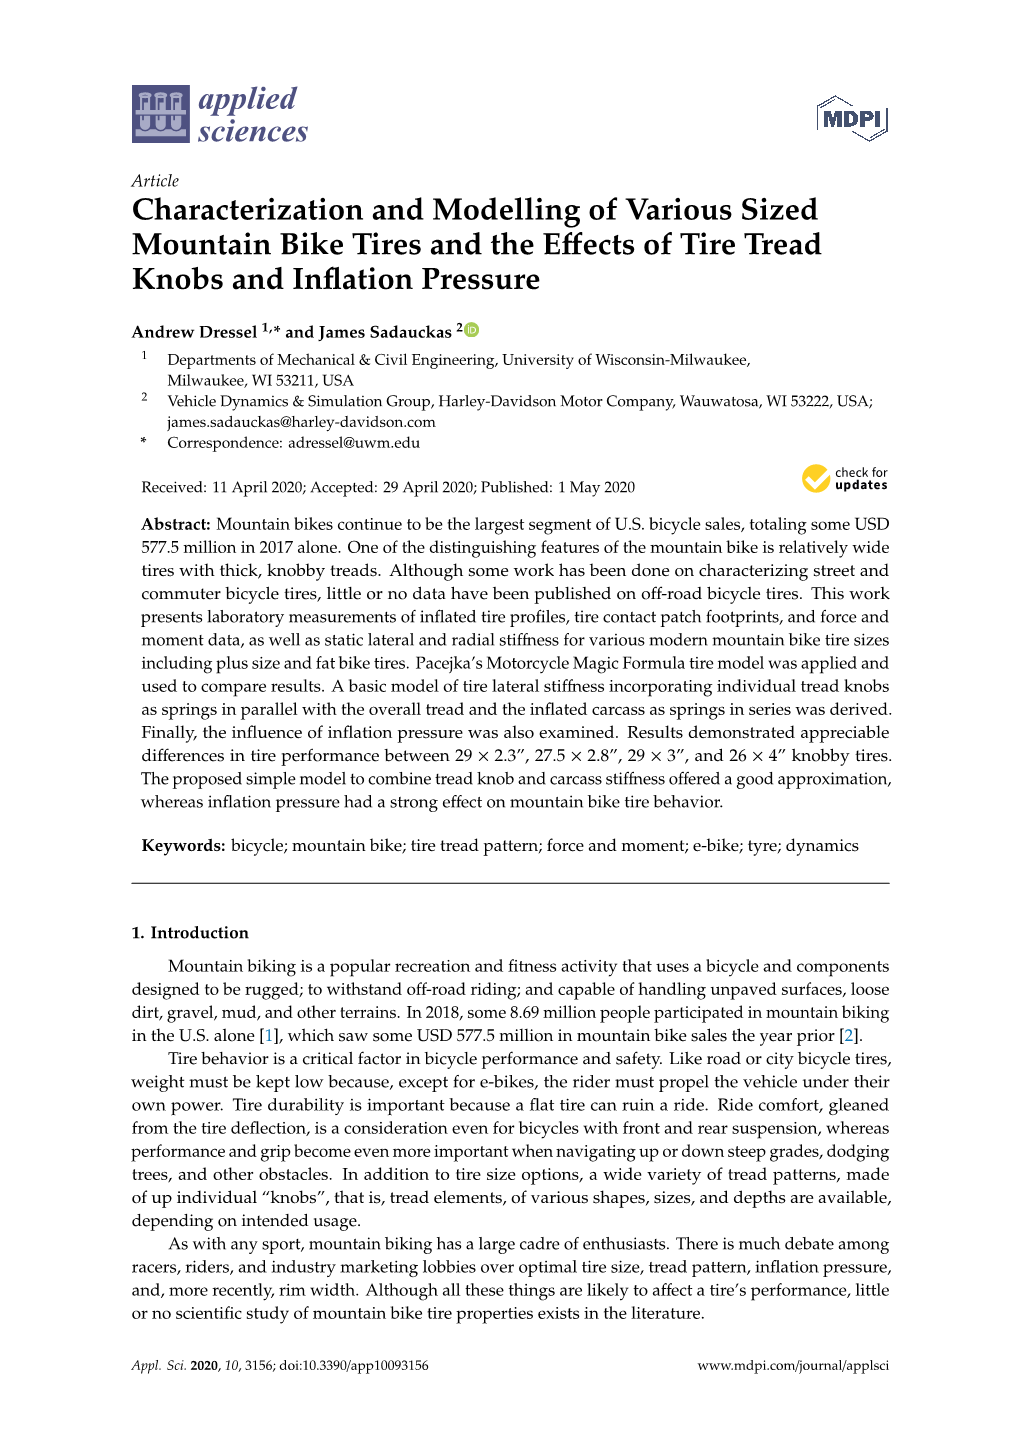 Characterization and Modelling of Various Sized Mountain Bike Tires and the Eﬀects of Tire Tread Knobs and Inﬂation Pressure